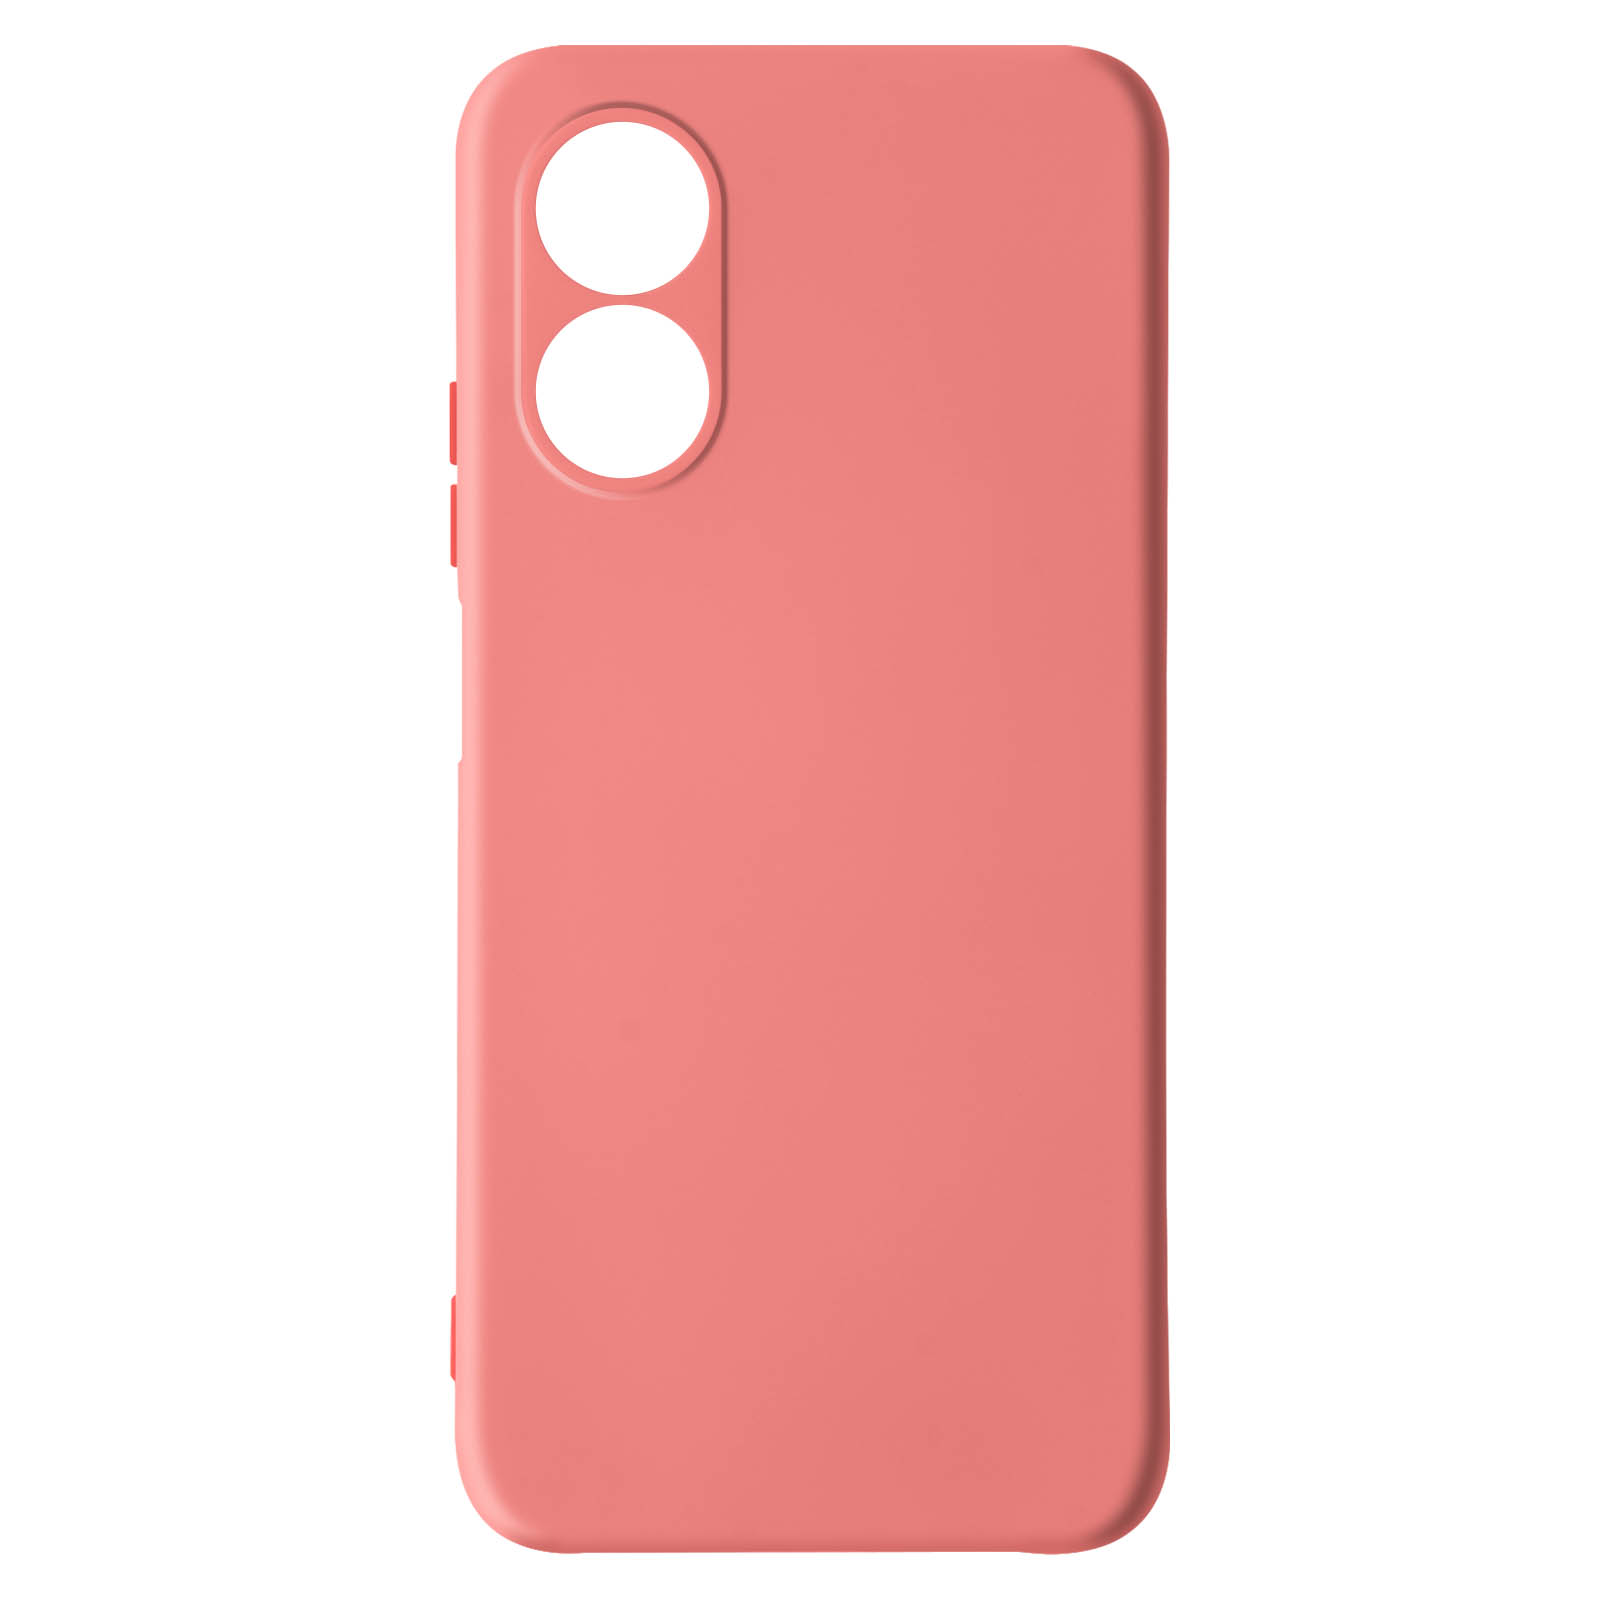 Series, Oppo, Oppo Touch Backcover, Rosa AVIZAR Soft A17,